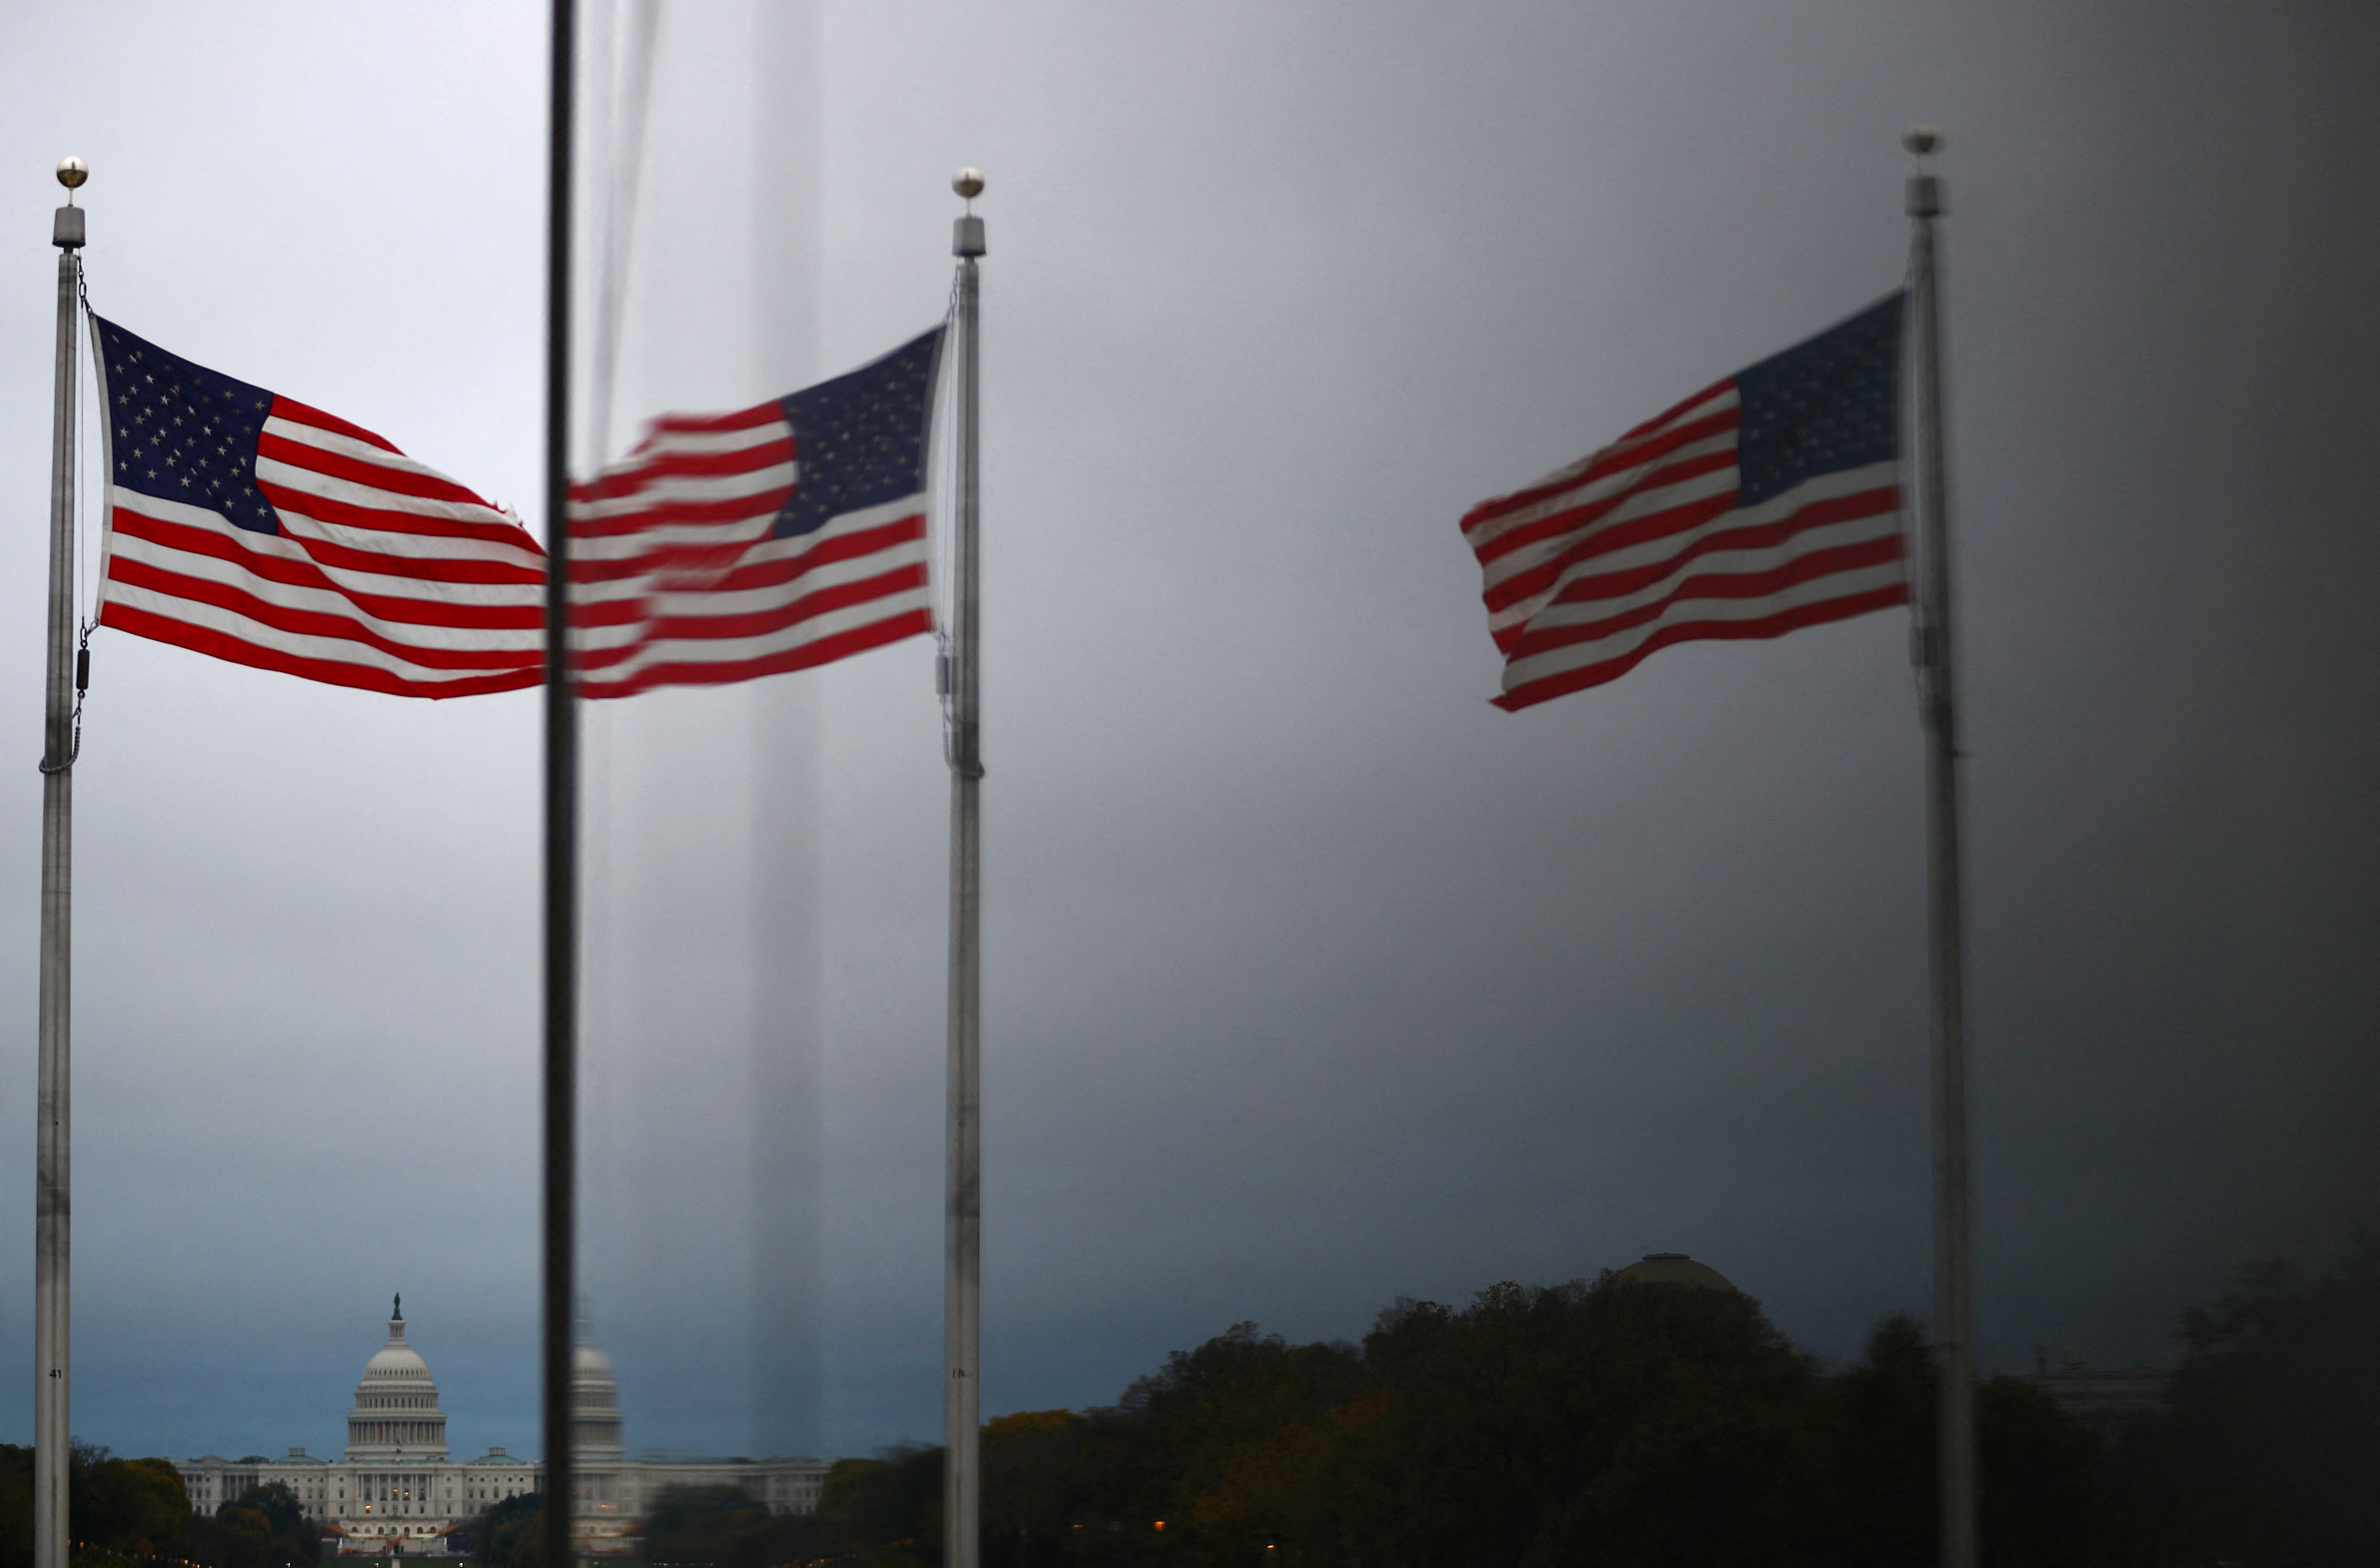 The United States Capitol and U.S flags are reflected in a window in Washington